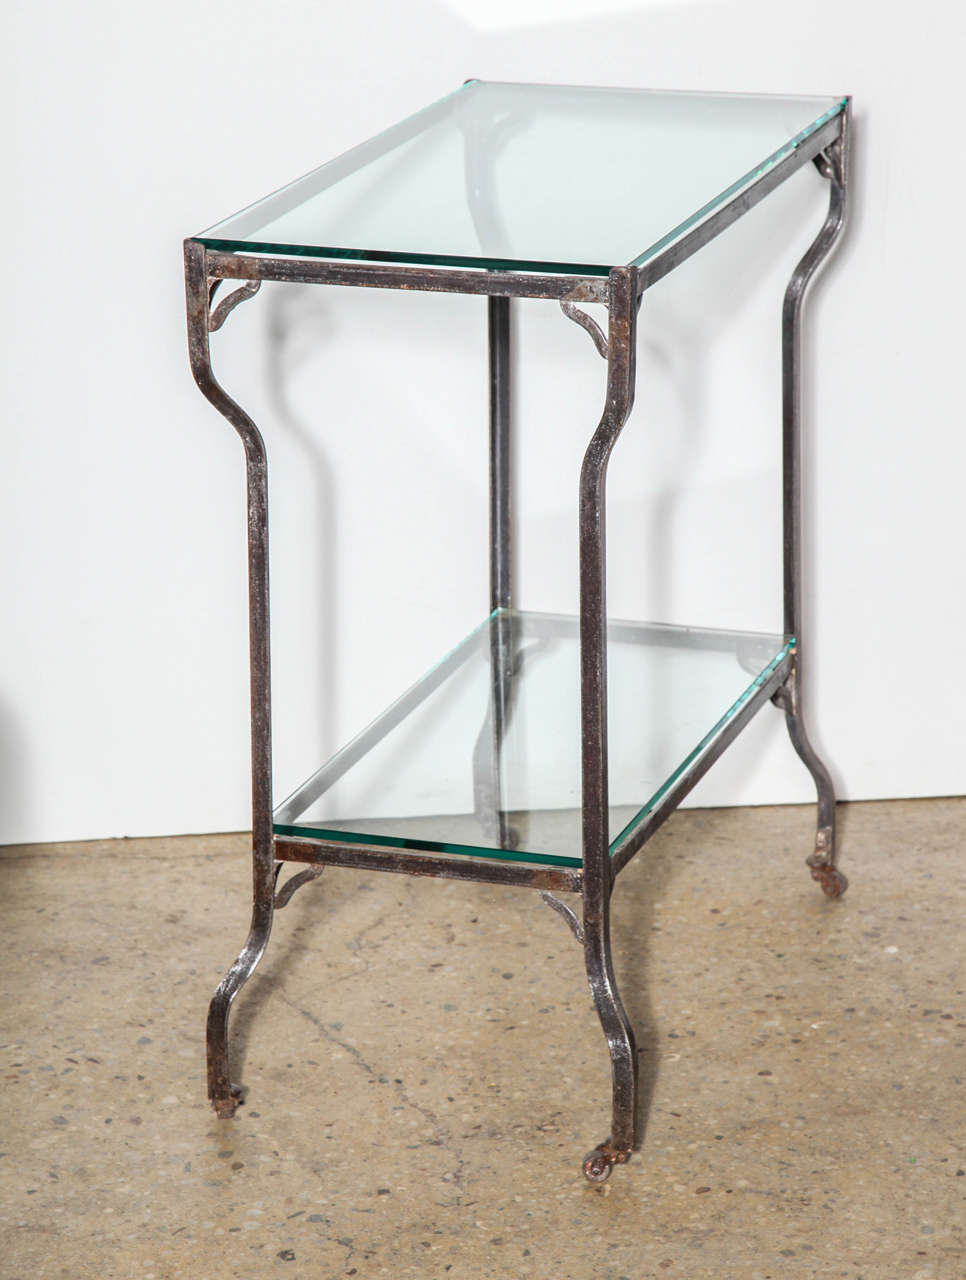 Circa 1890s Two Tier Steel Rolling Etagere with Two Glass Shelves 2